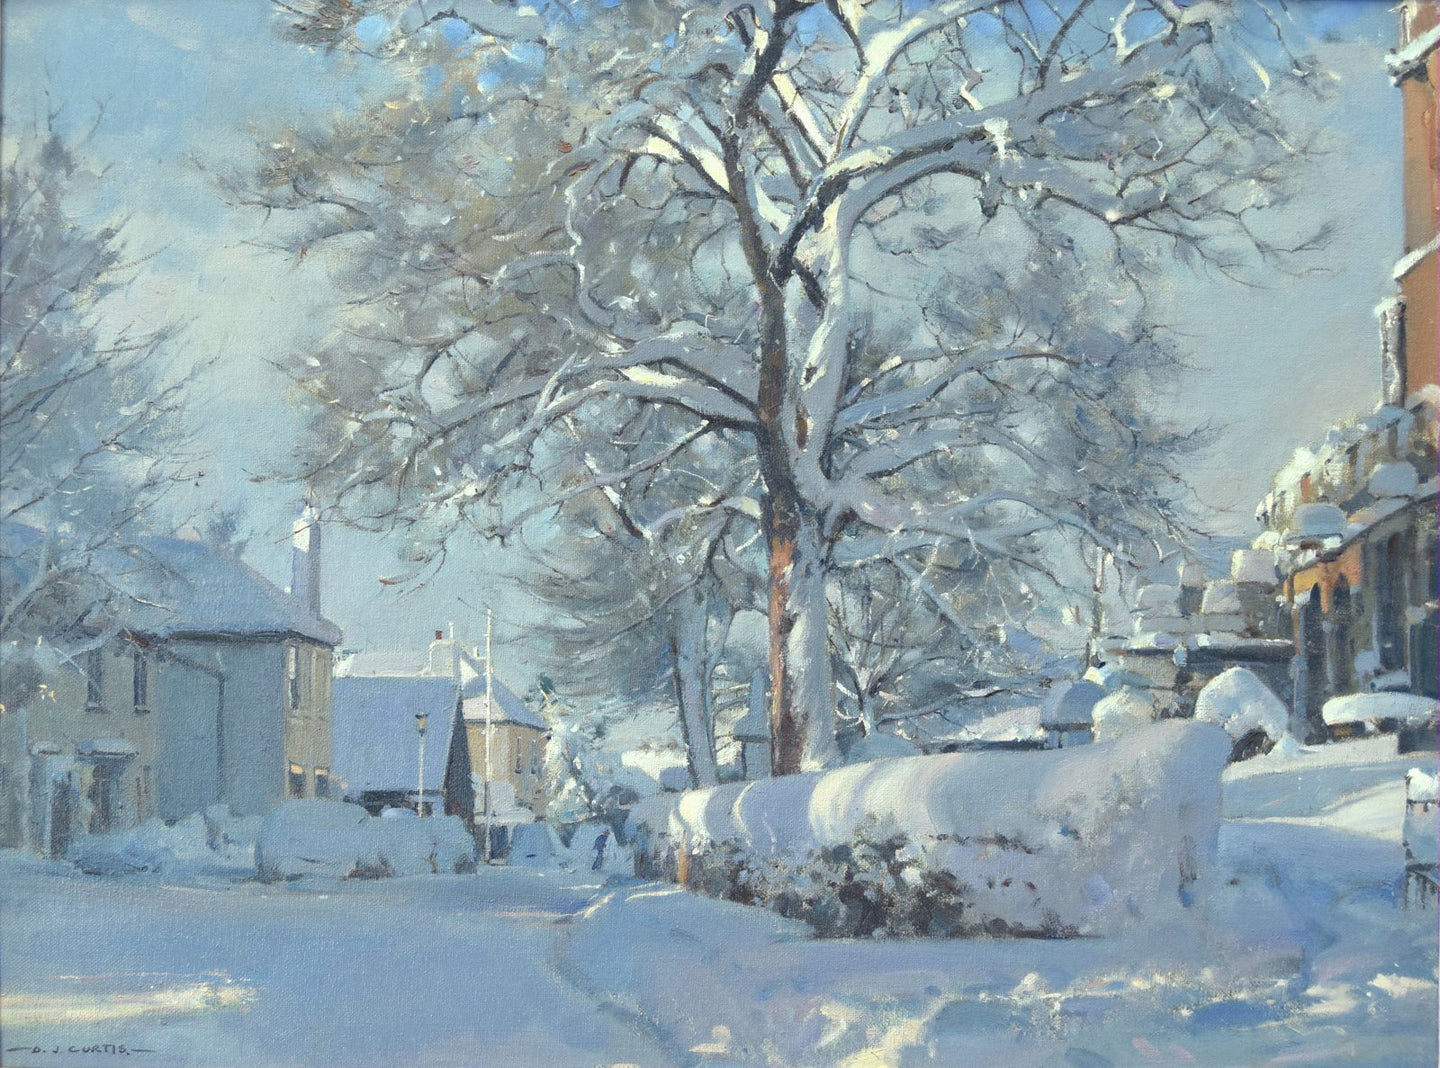 Oil by David Curtis in Misson, after a heavy snowfall. Shadows and highlights describe the forms of a large tree and hedgerow